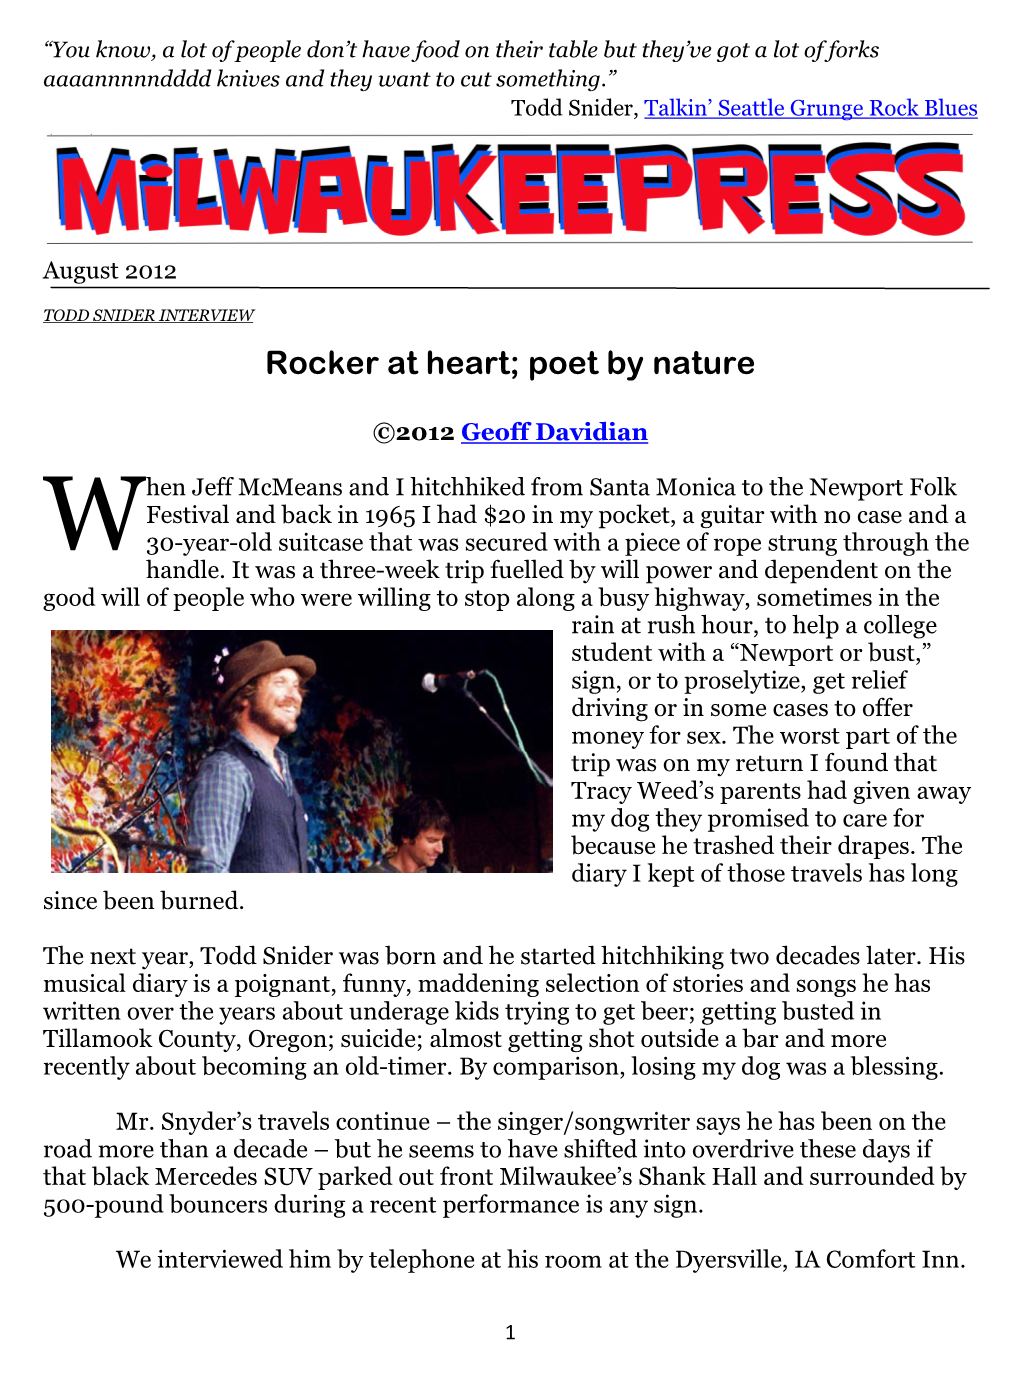 Todd Snider Interview: Rocker at Heart; Poet by Nature